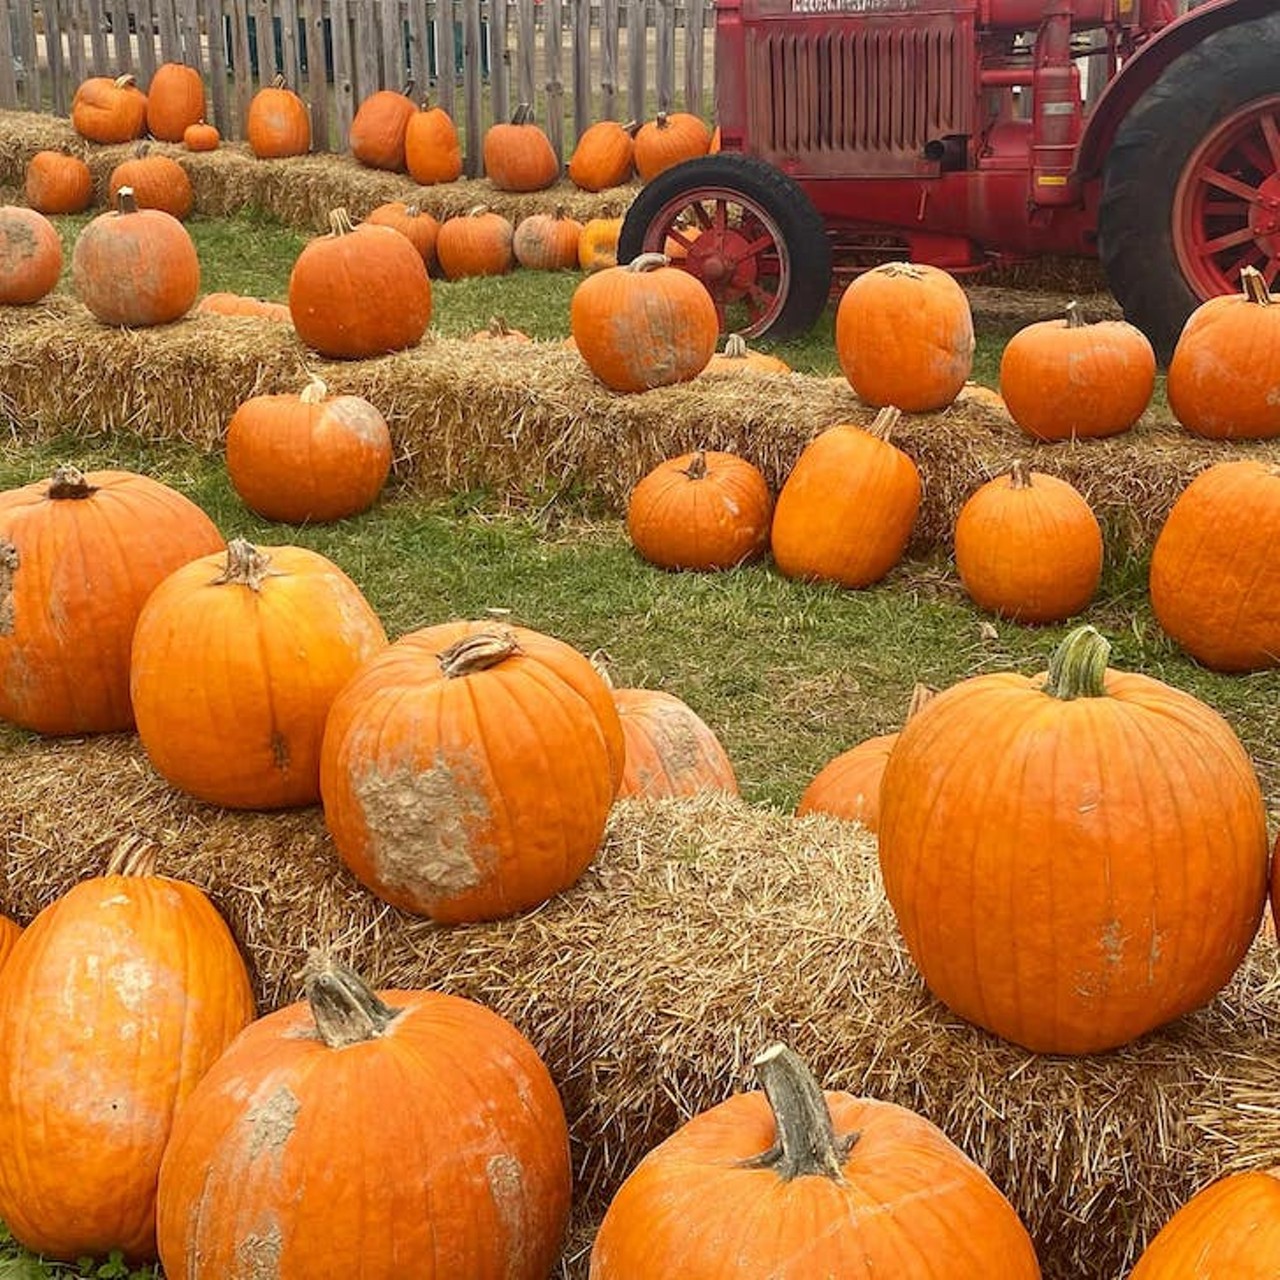 Blake's Orchard & Cider Mill
17985 Armada Center Rd., Armada; 586-784-5343; blakefarms.com
With haunted hayrides, a three story haunted barn, zombie paintball, pumpkins, apples, Blake&#146;s is a vertiable autumn wonderland. 
Photo via Blake's Orchard & Cider Mill/Facebook